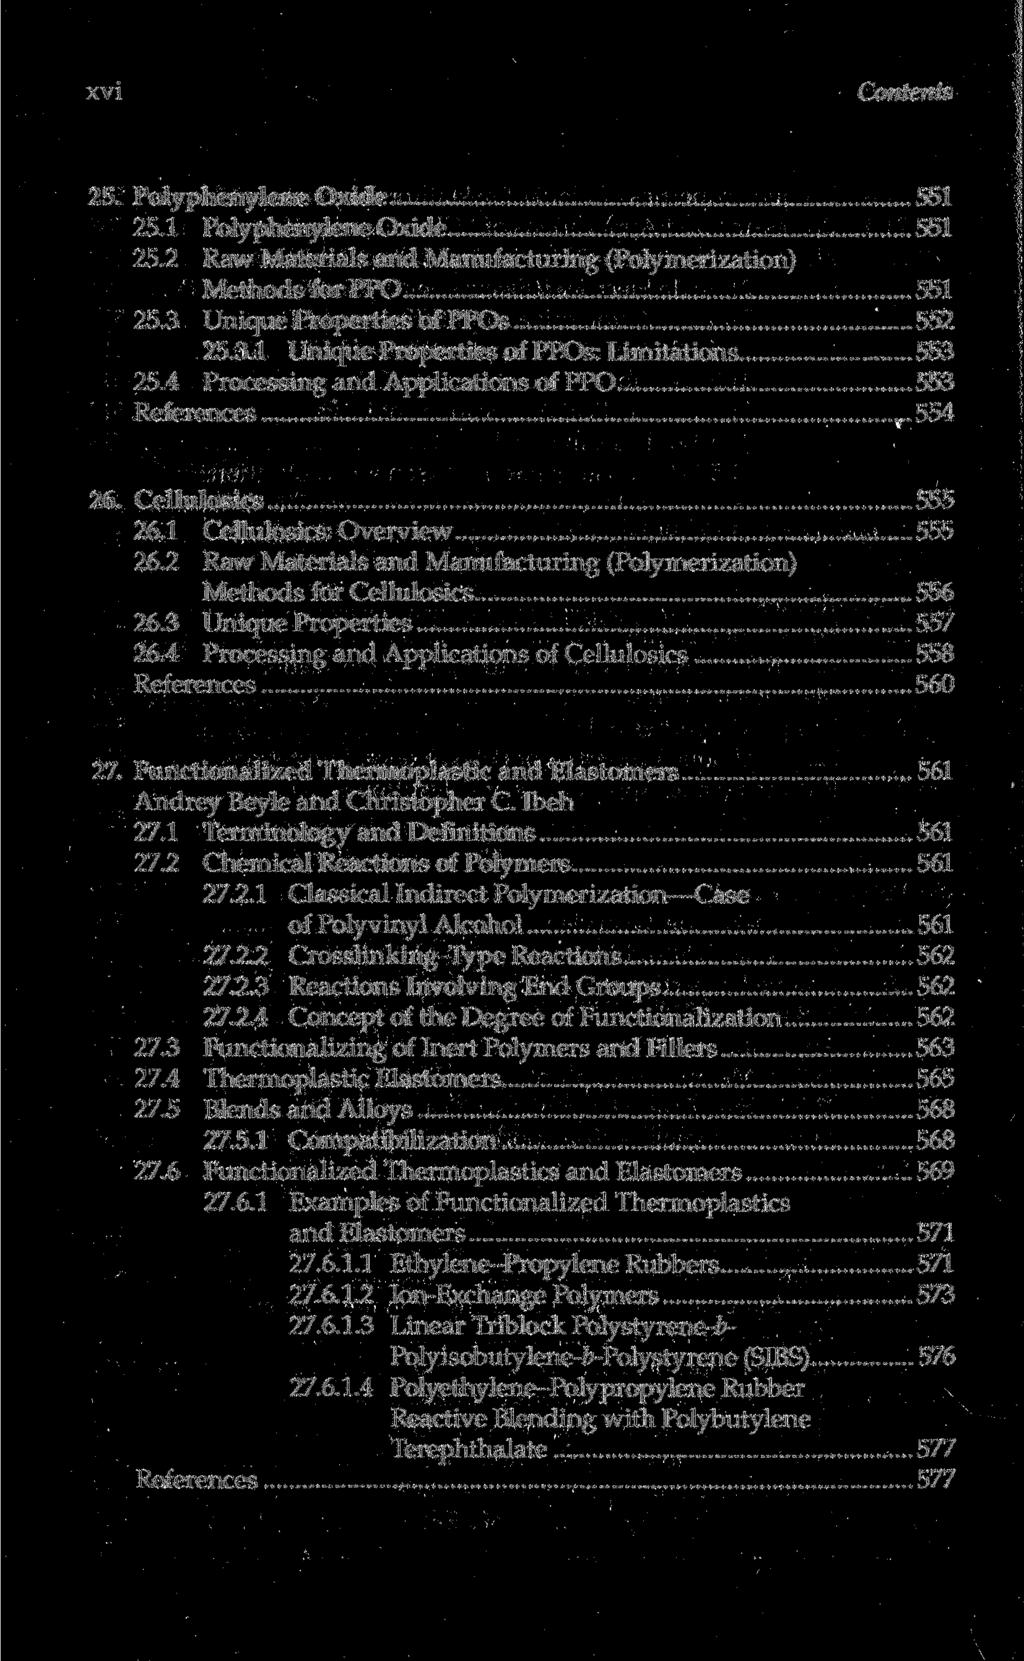 xvi Contents 25. Polyphenylene Oxide 551 25.1 Polyphenylene Oxide 551 25.2 Raw Materials and Manufacturing (Polymerization) Methods for PPO 551 25.3 Unique Properties of PPOs 552 25.3.1 Unique Properties of PPOs: Limitations 553 25.